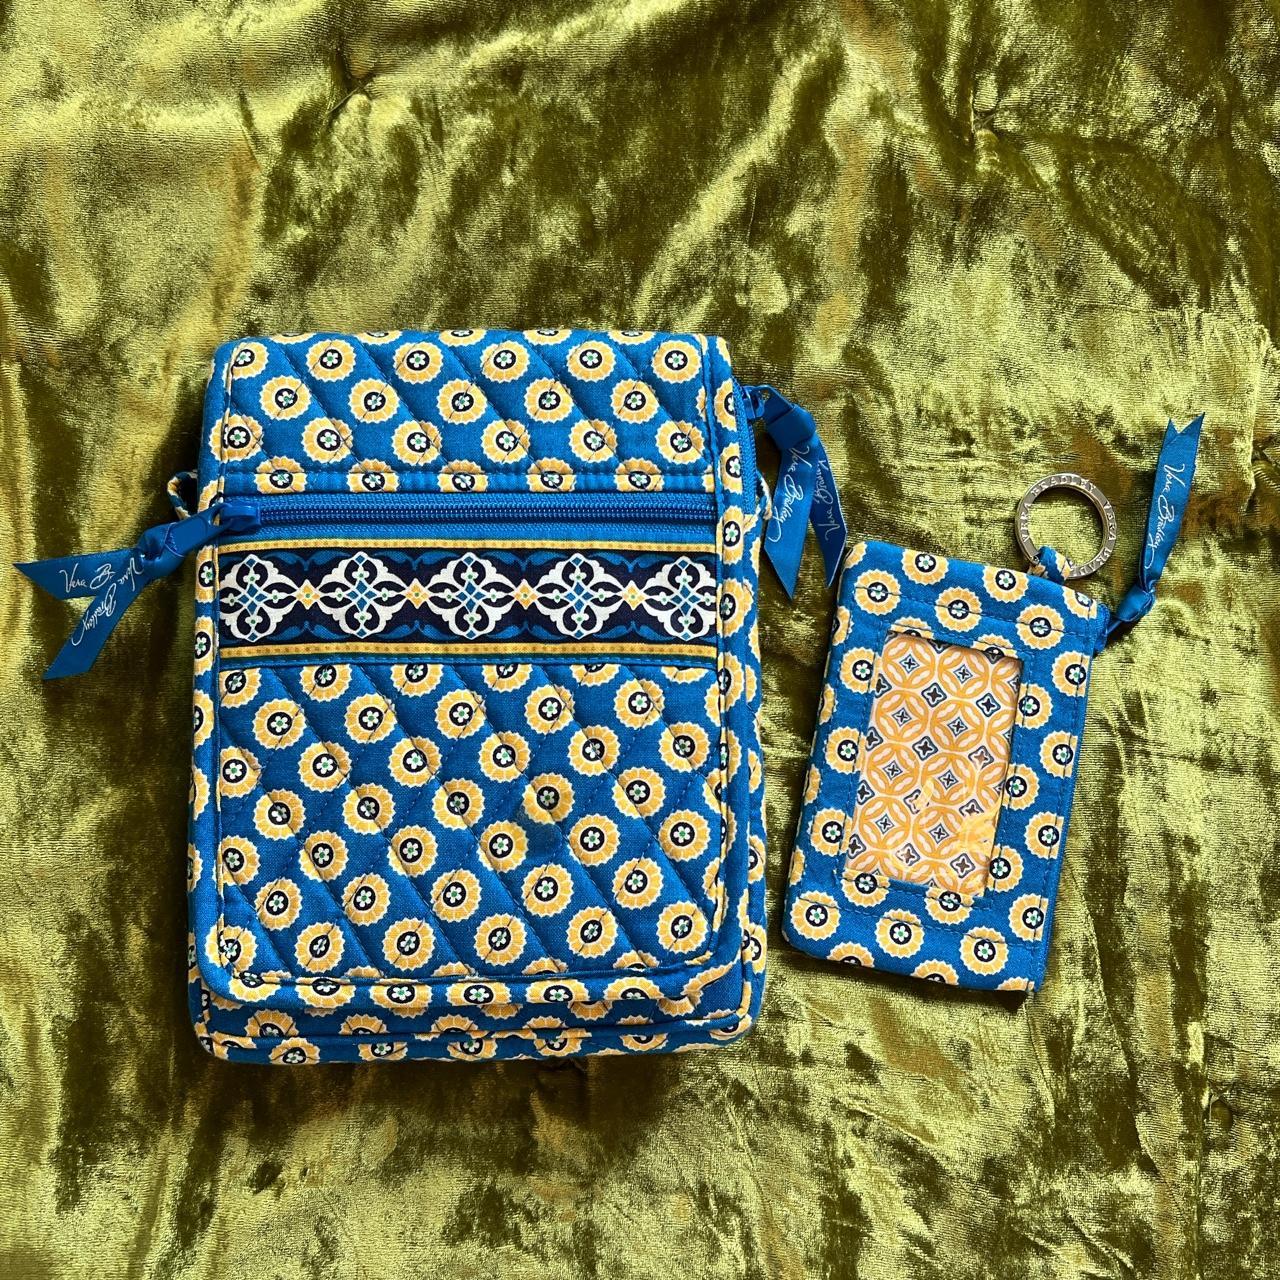 New and used Vera Bradley Bags for sale | Facebook Marketplace